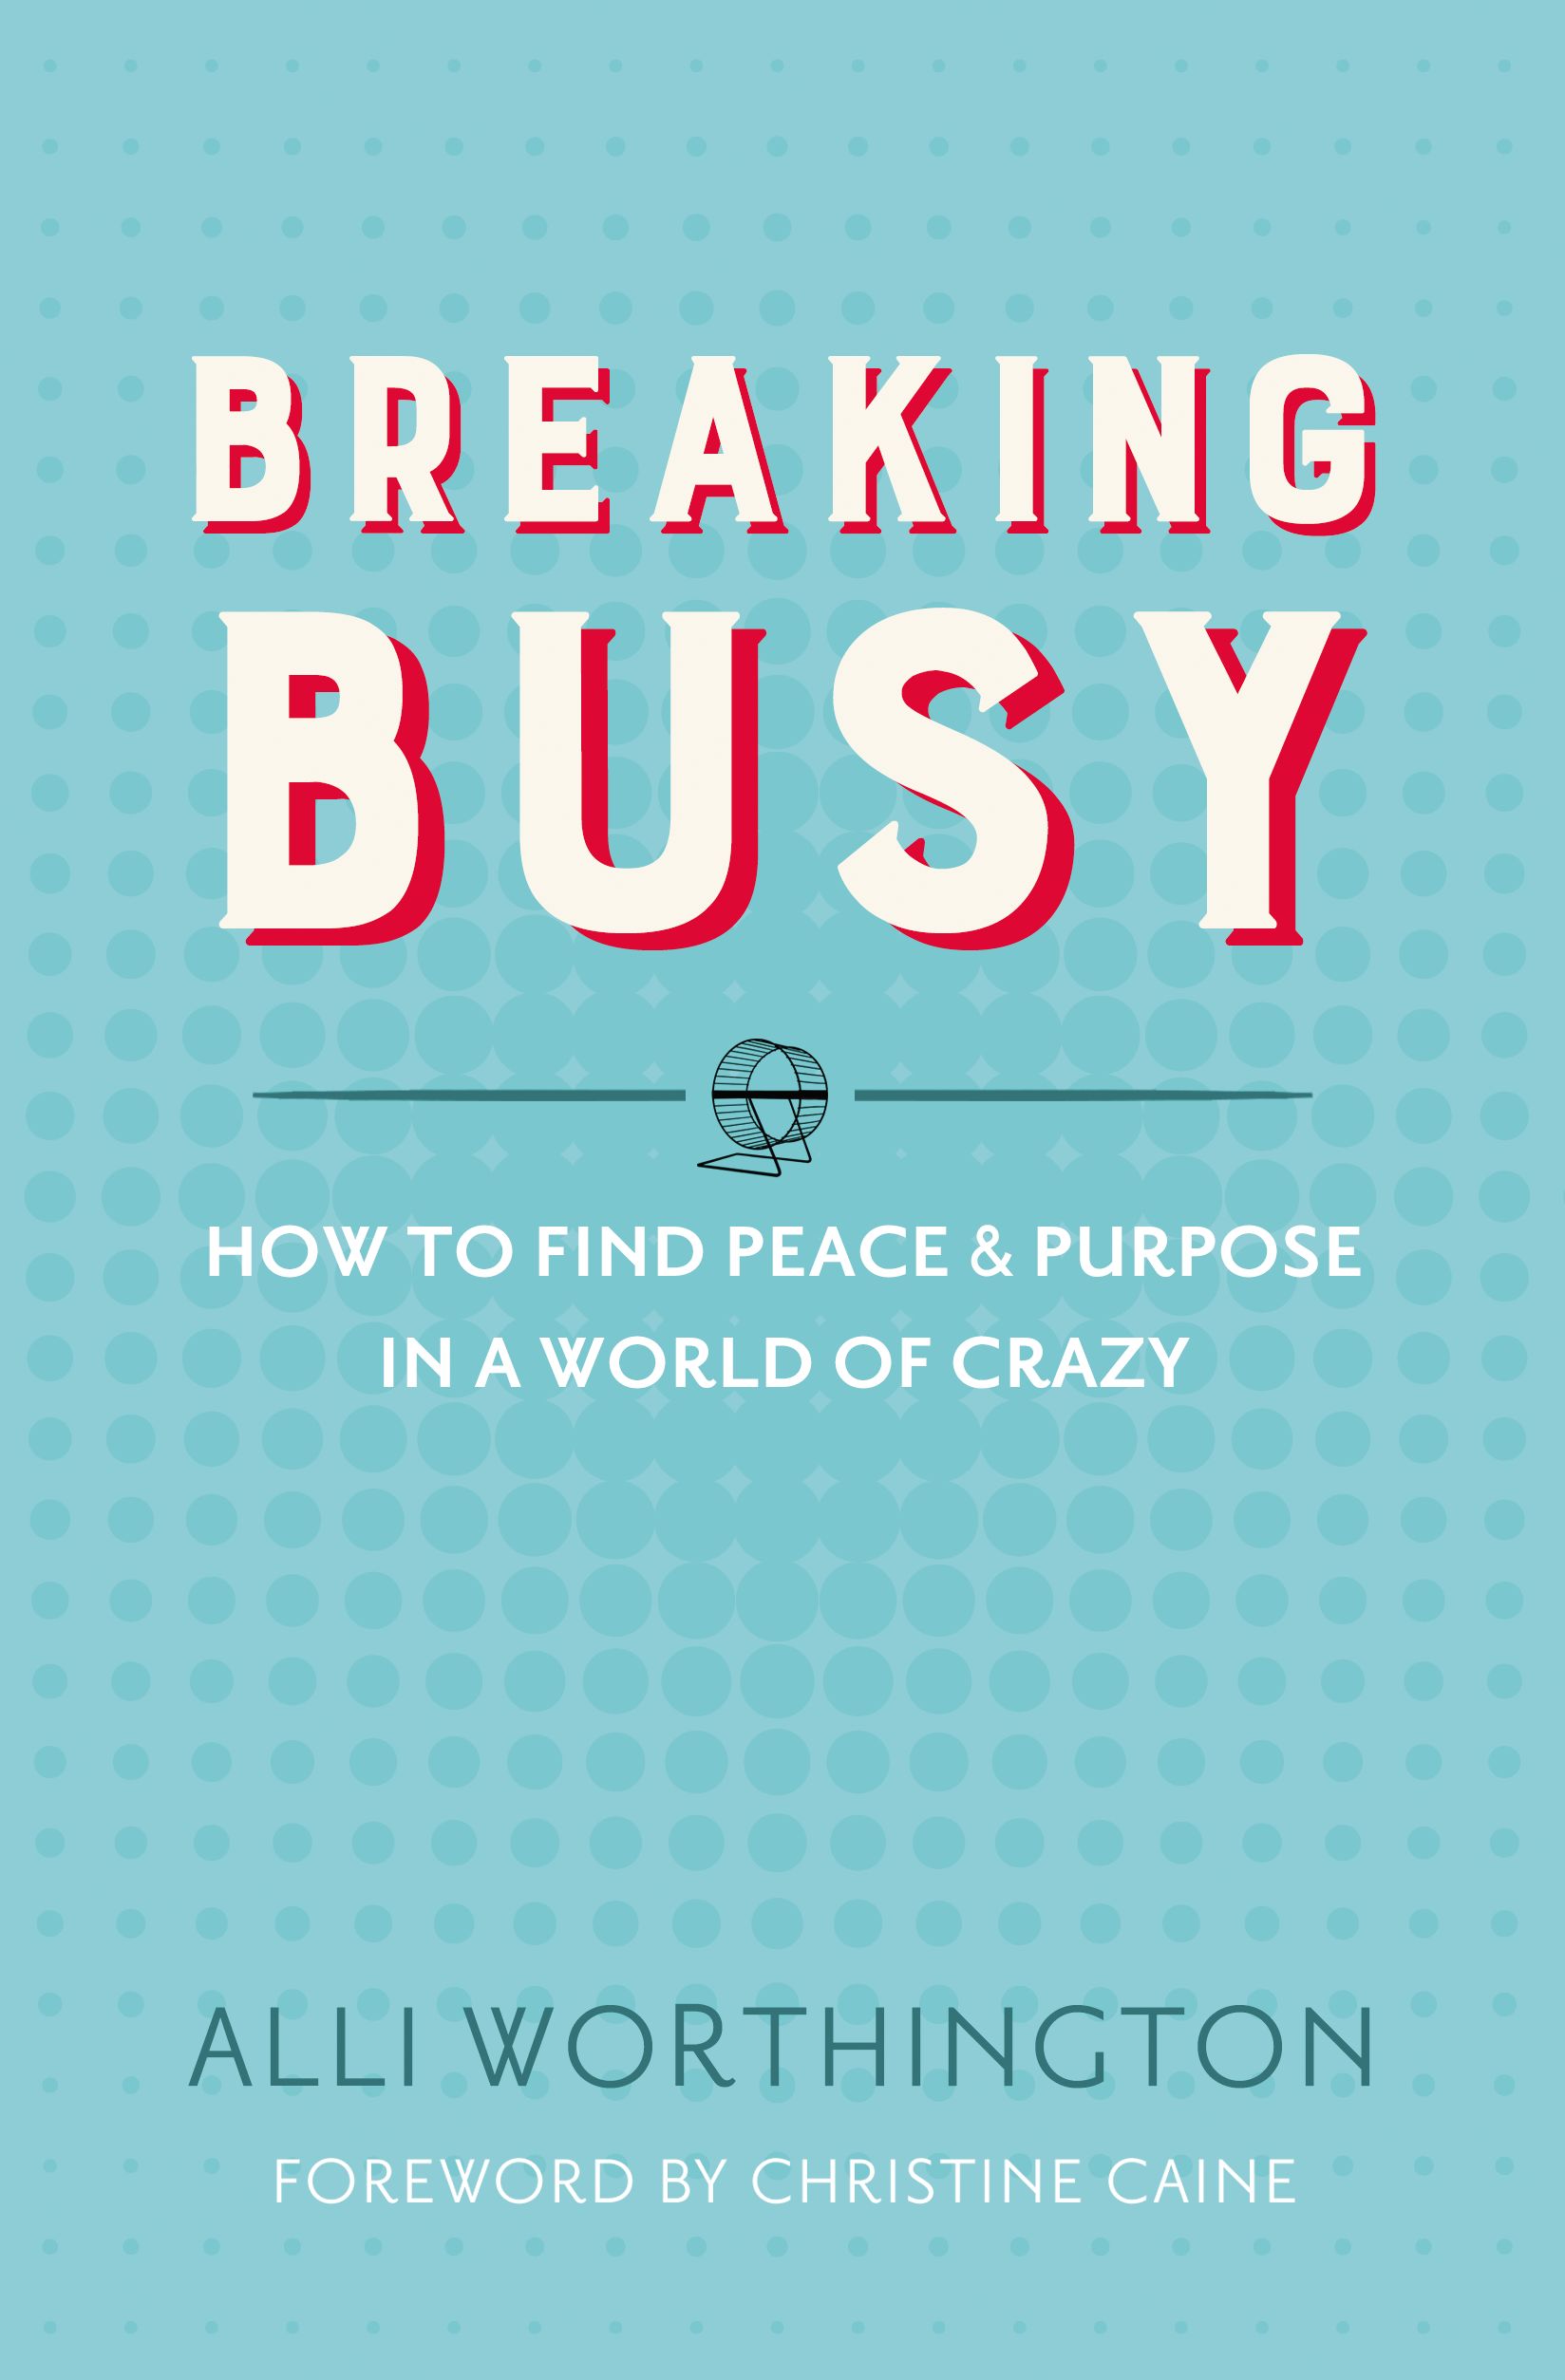 Breaking Busy: A Book Review | Making the Most Blog